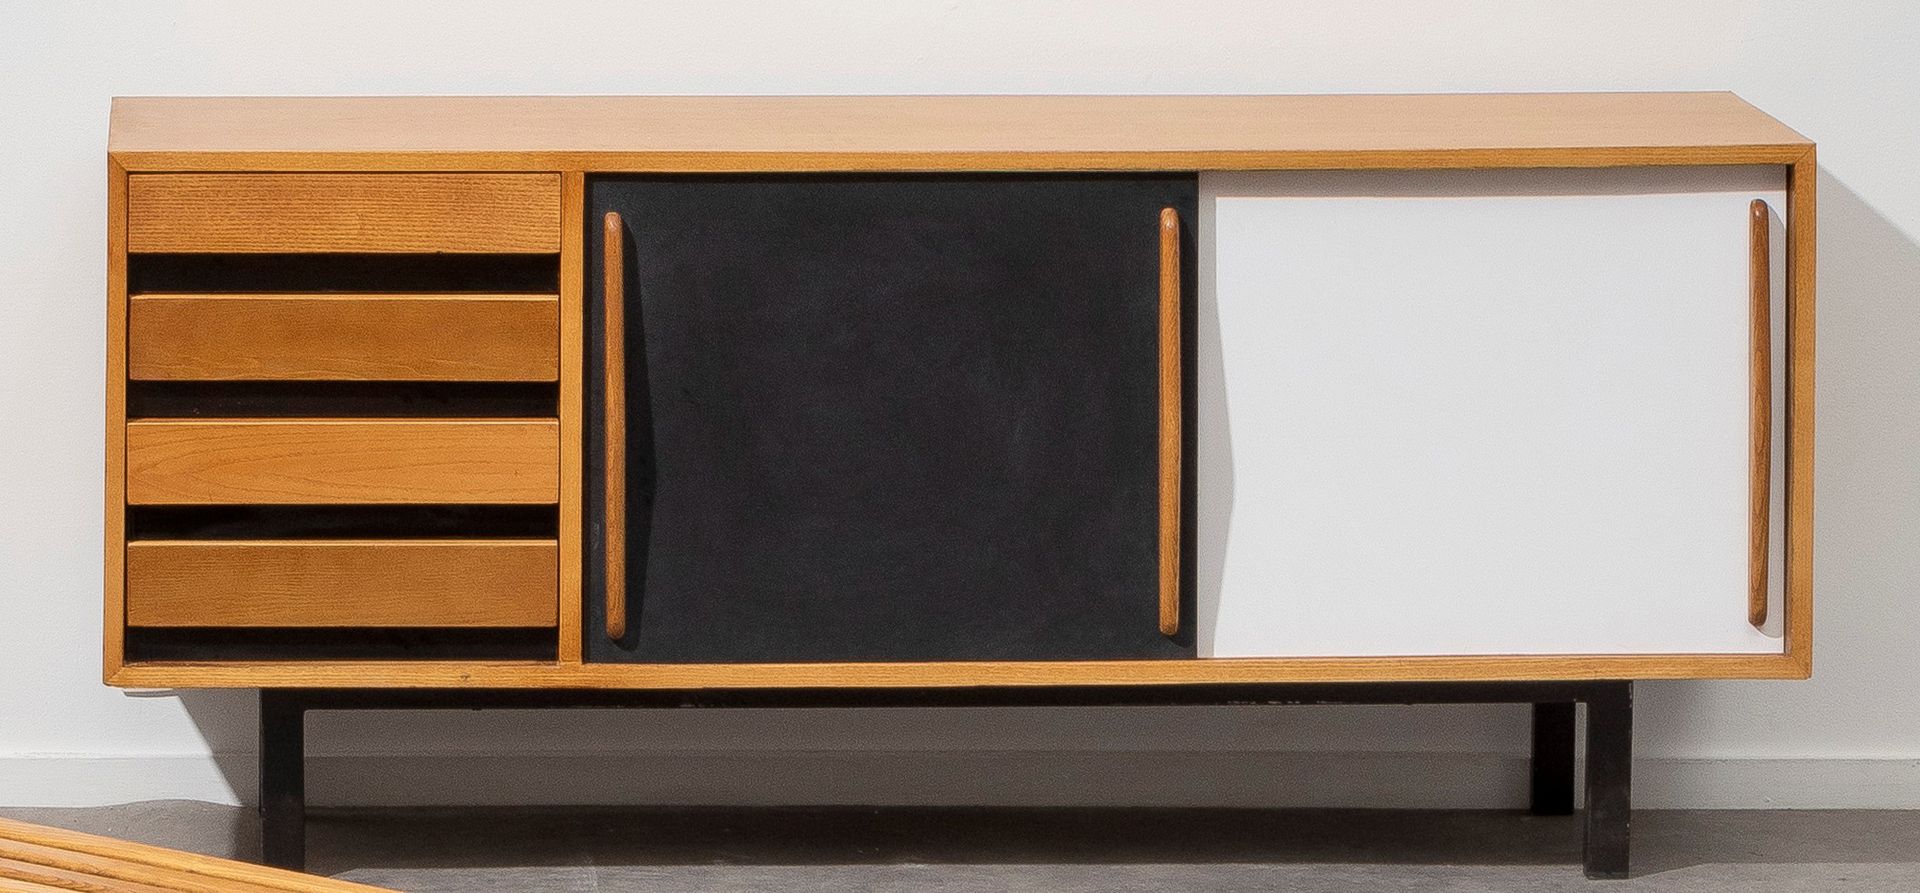 CHARLOTTE PERRIAND (1909-1999) Cansado
Sideboard with drawers
Black and white la&hellip;